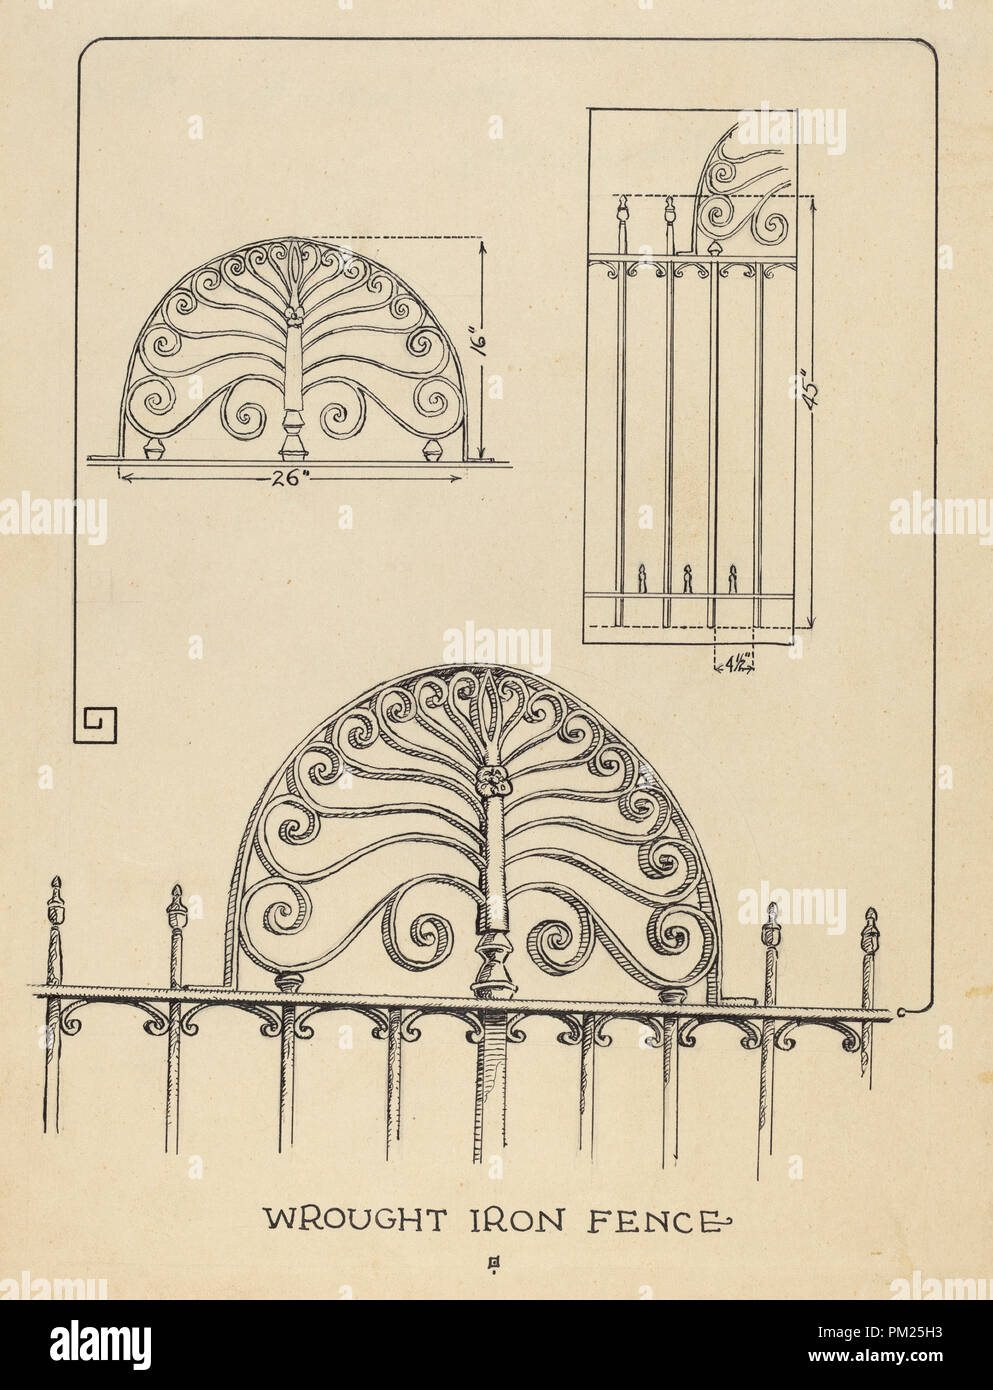 Balcony Railing. Dated: 1935/1942. Dimensions: overall: 29.3 x 22.3 cm (11 9/16 x 8 3/4 in.). Medium: pen and ink on paper. Museum: National Gallery of Art, Washington DC. Author: Al Curry. Stock Photo